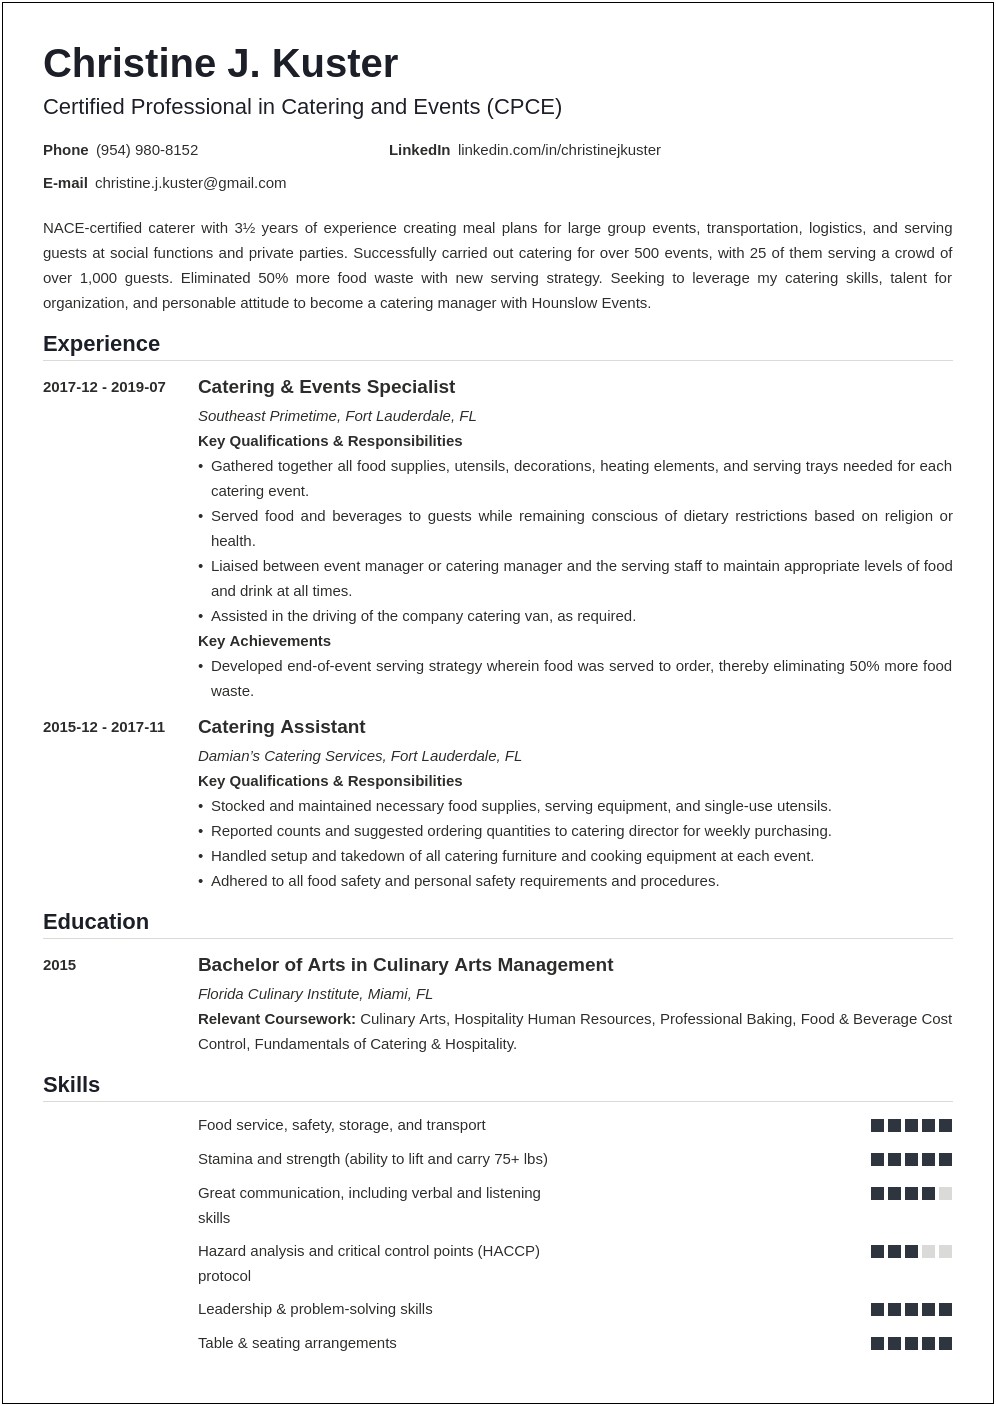 Resume Objective Statement Examples In Food Service Management